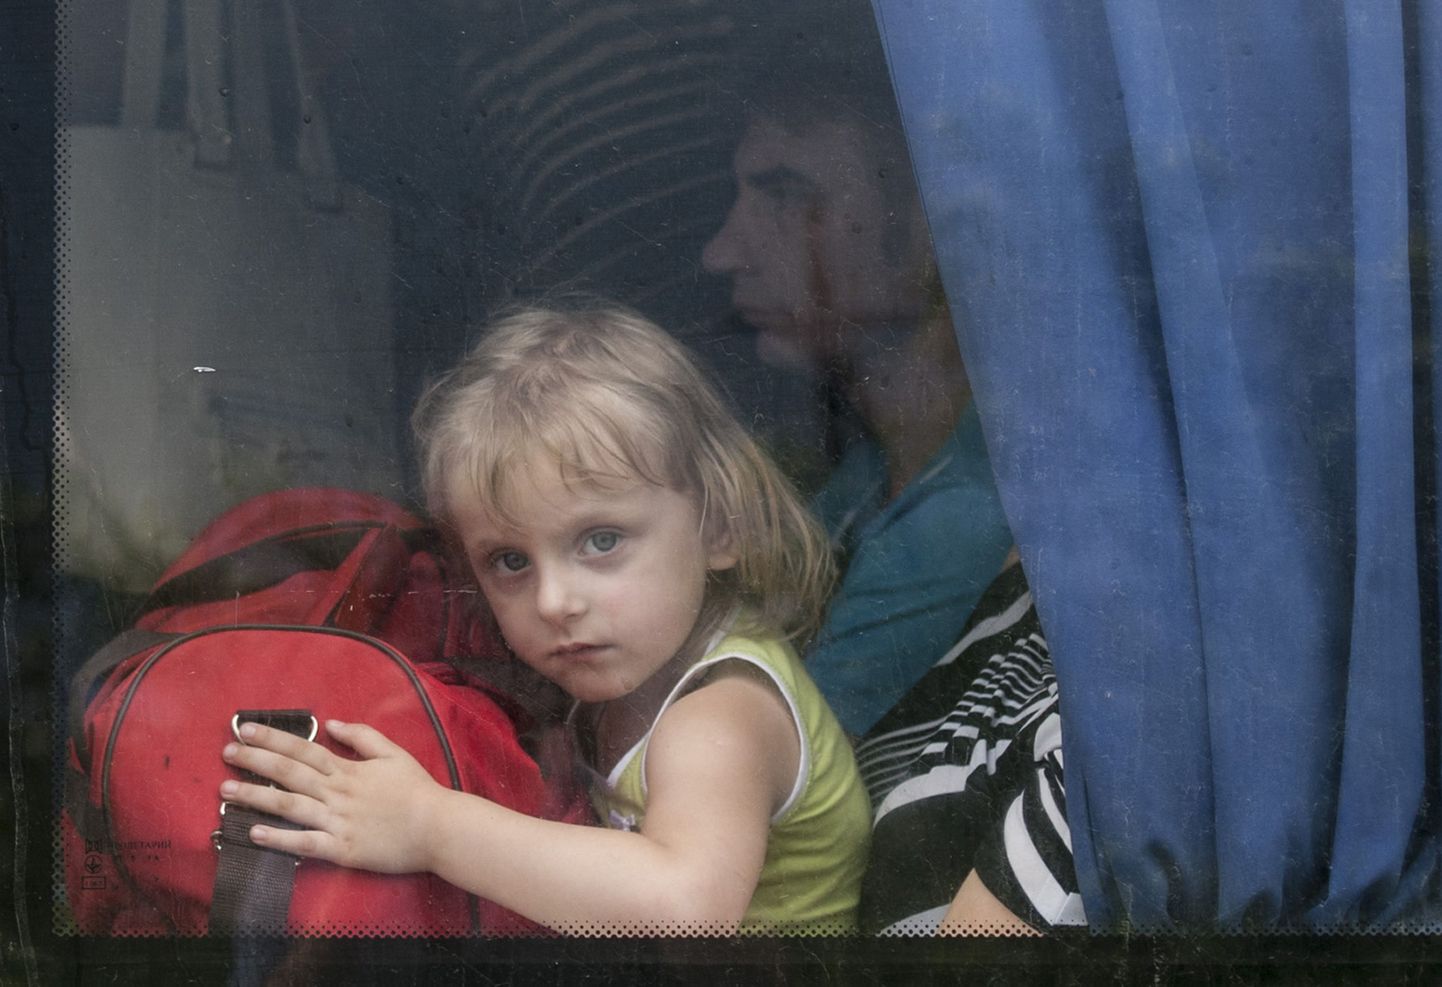 A girl looks out of a bus window, leaving Slovyansk, eastern Ukraine, Monday, June 9, 2014 after a mortar attack by Ukrainian government forces. Several buildings have been damaged by shelling in an eastern Ukraine city controlled by pro-Russian separatists, as the countrys president announced that negotiations are underway to bring the conflict to an end. (AP Photo/Evgeniy Maloletka) / TT / kod 436